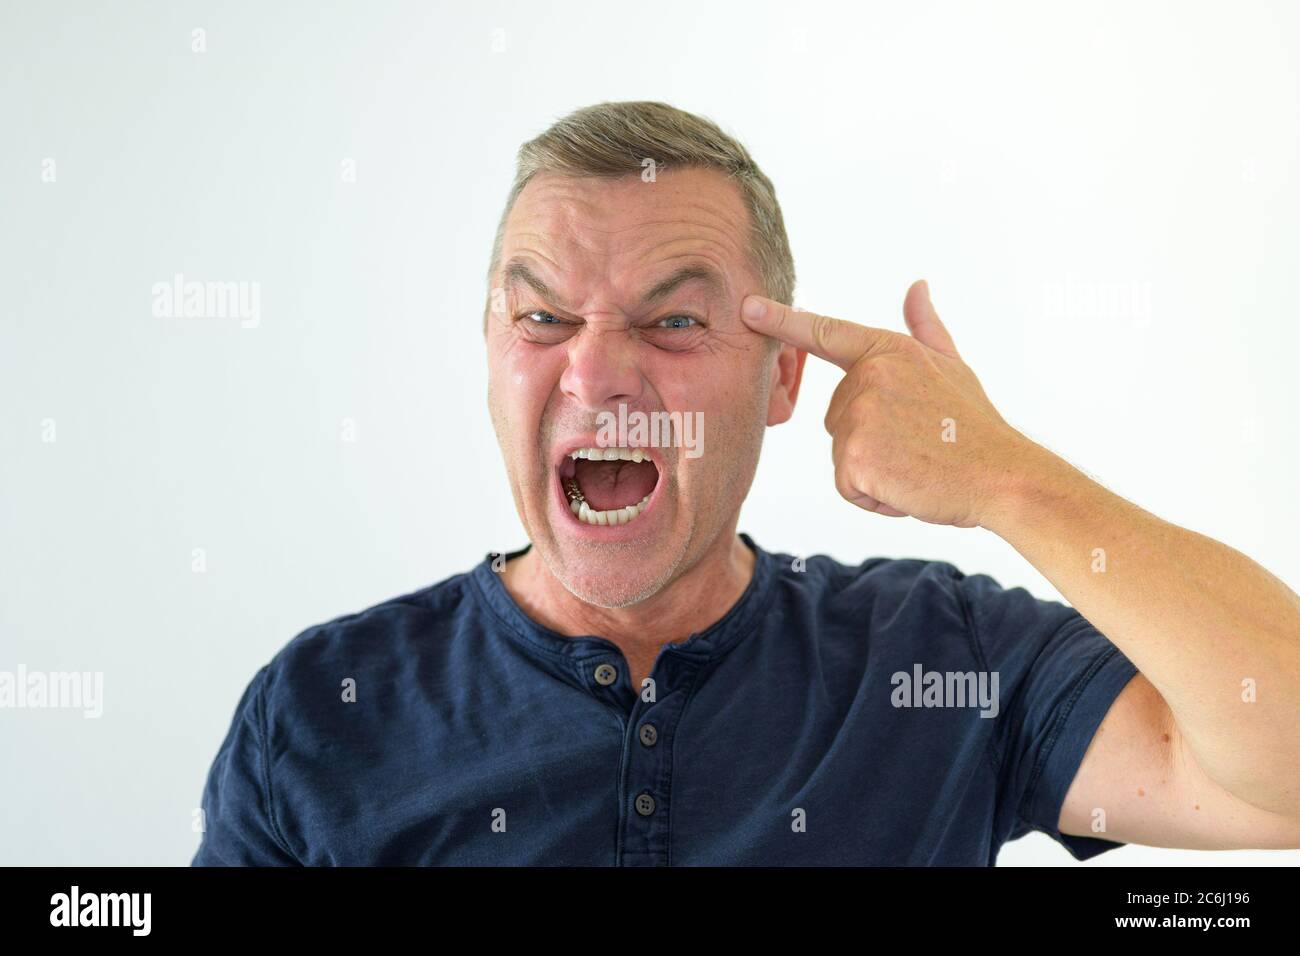 Angry man making a threatening gun gesture with his hand pointing at his own forehead while yelling at the camera in a head and shoulders portrait on Stock Photo